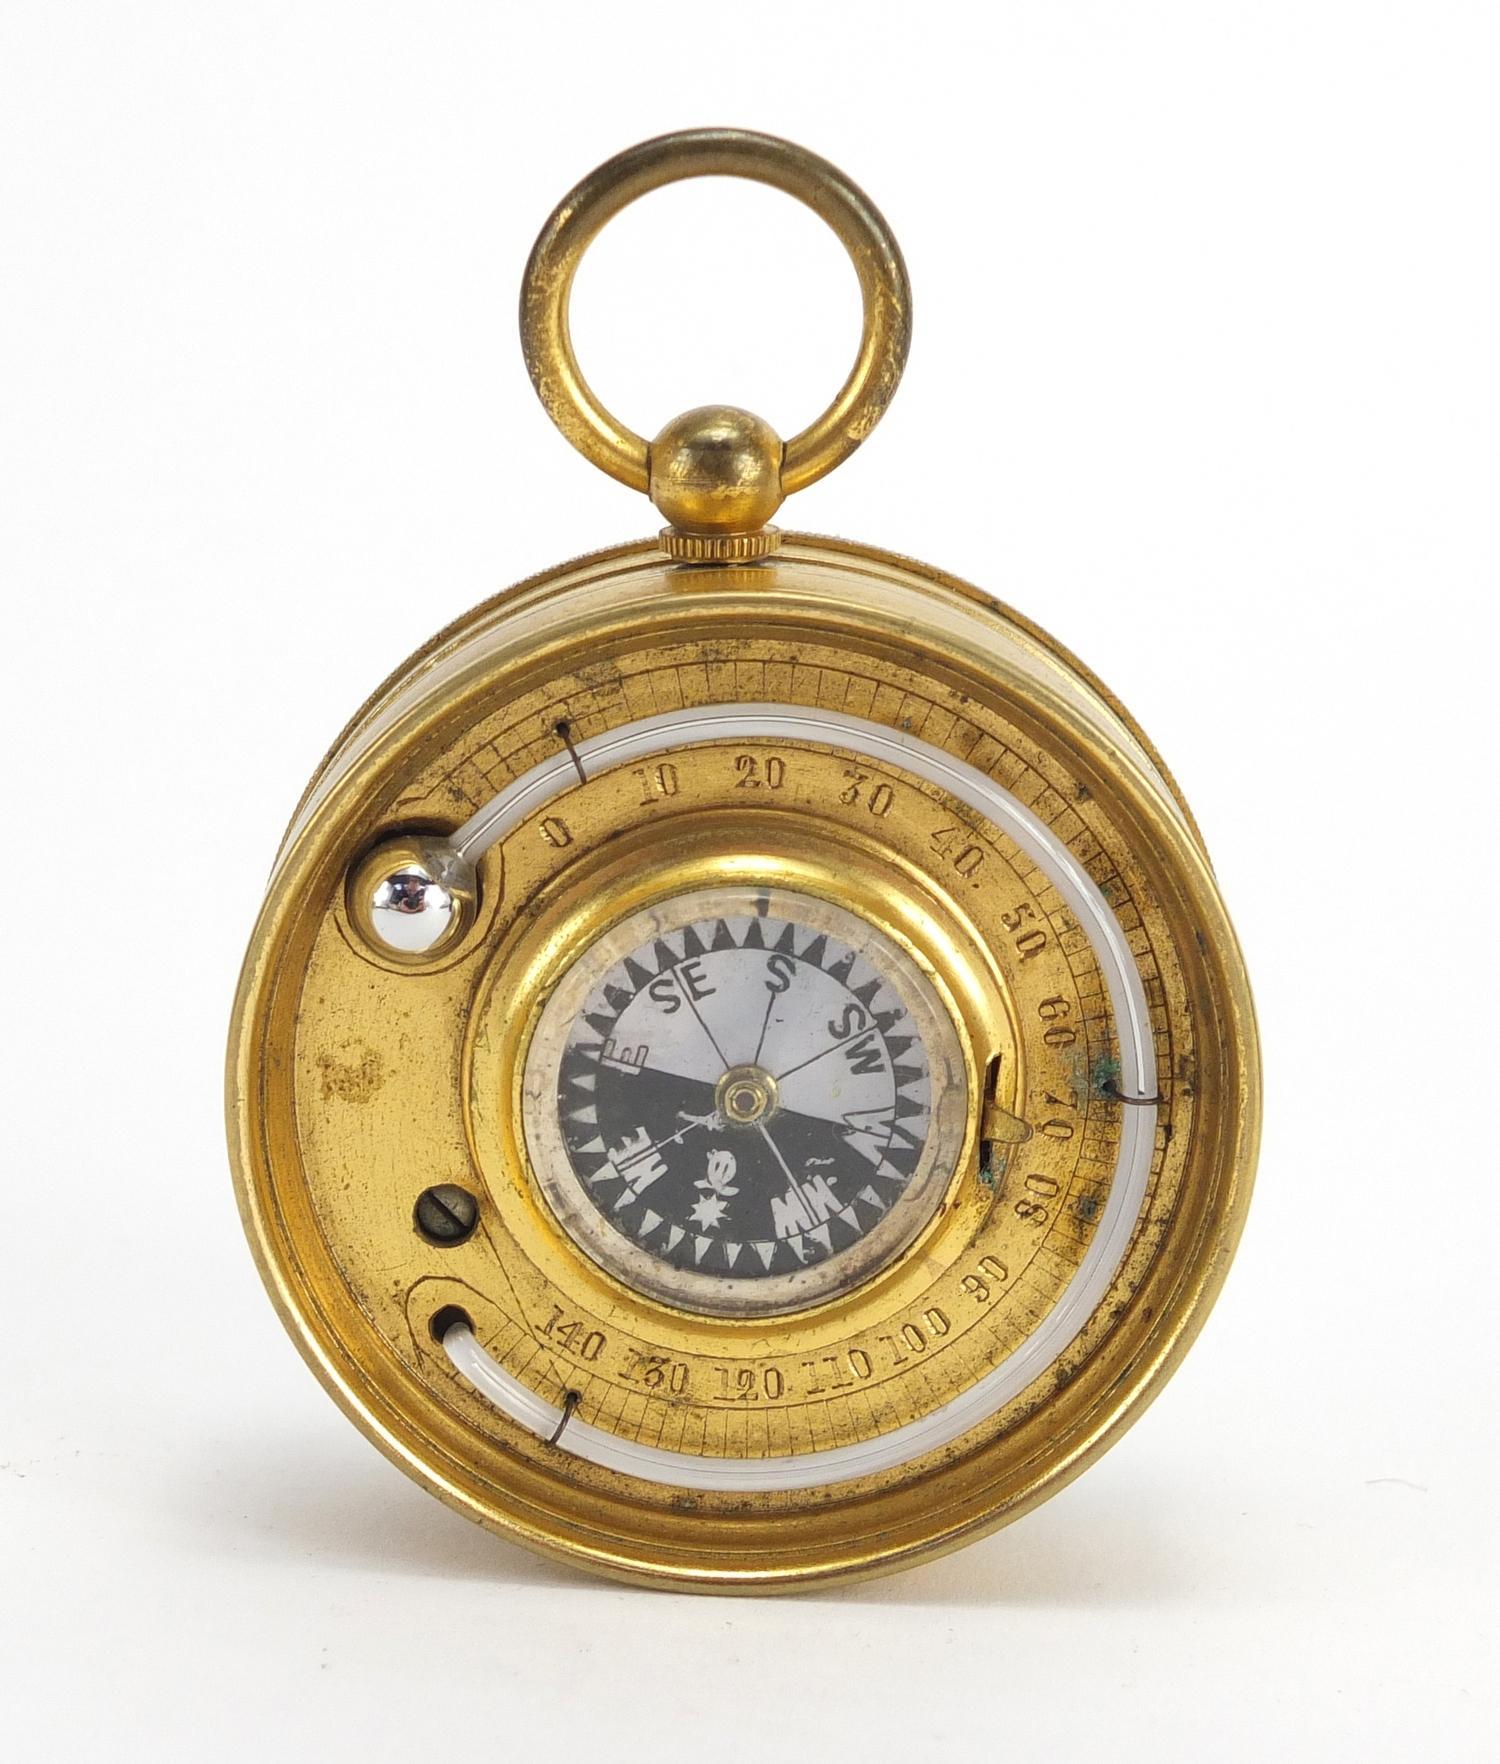 19th century gilt brass pocket weath station with compensated barometer, thermometer and compass, - Image 4 of 8